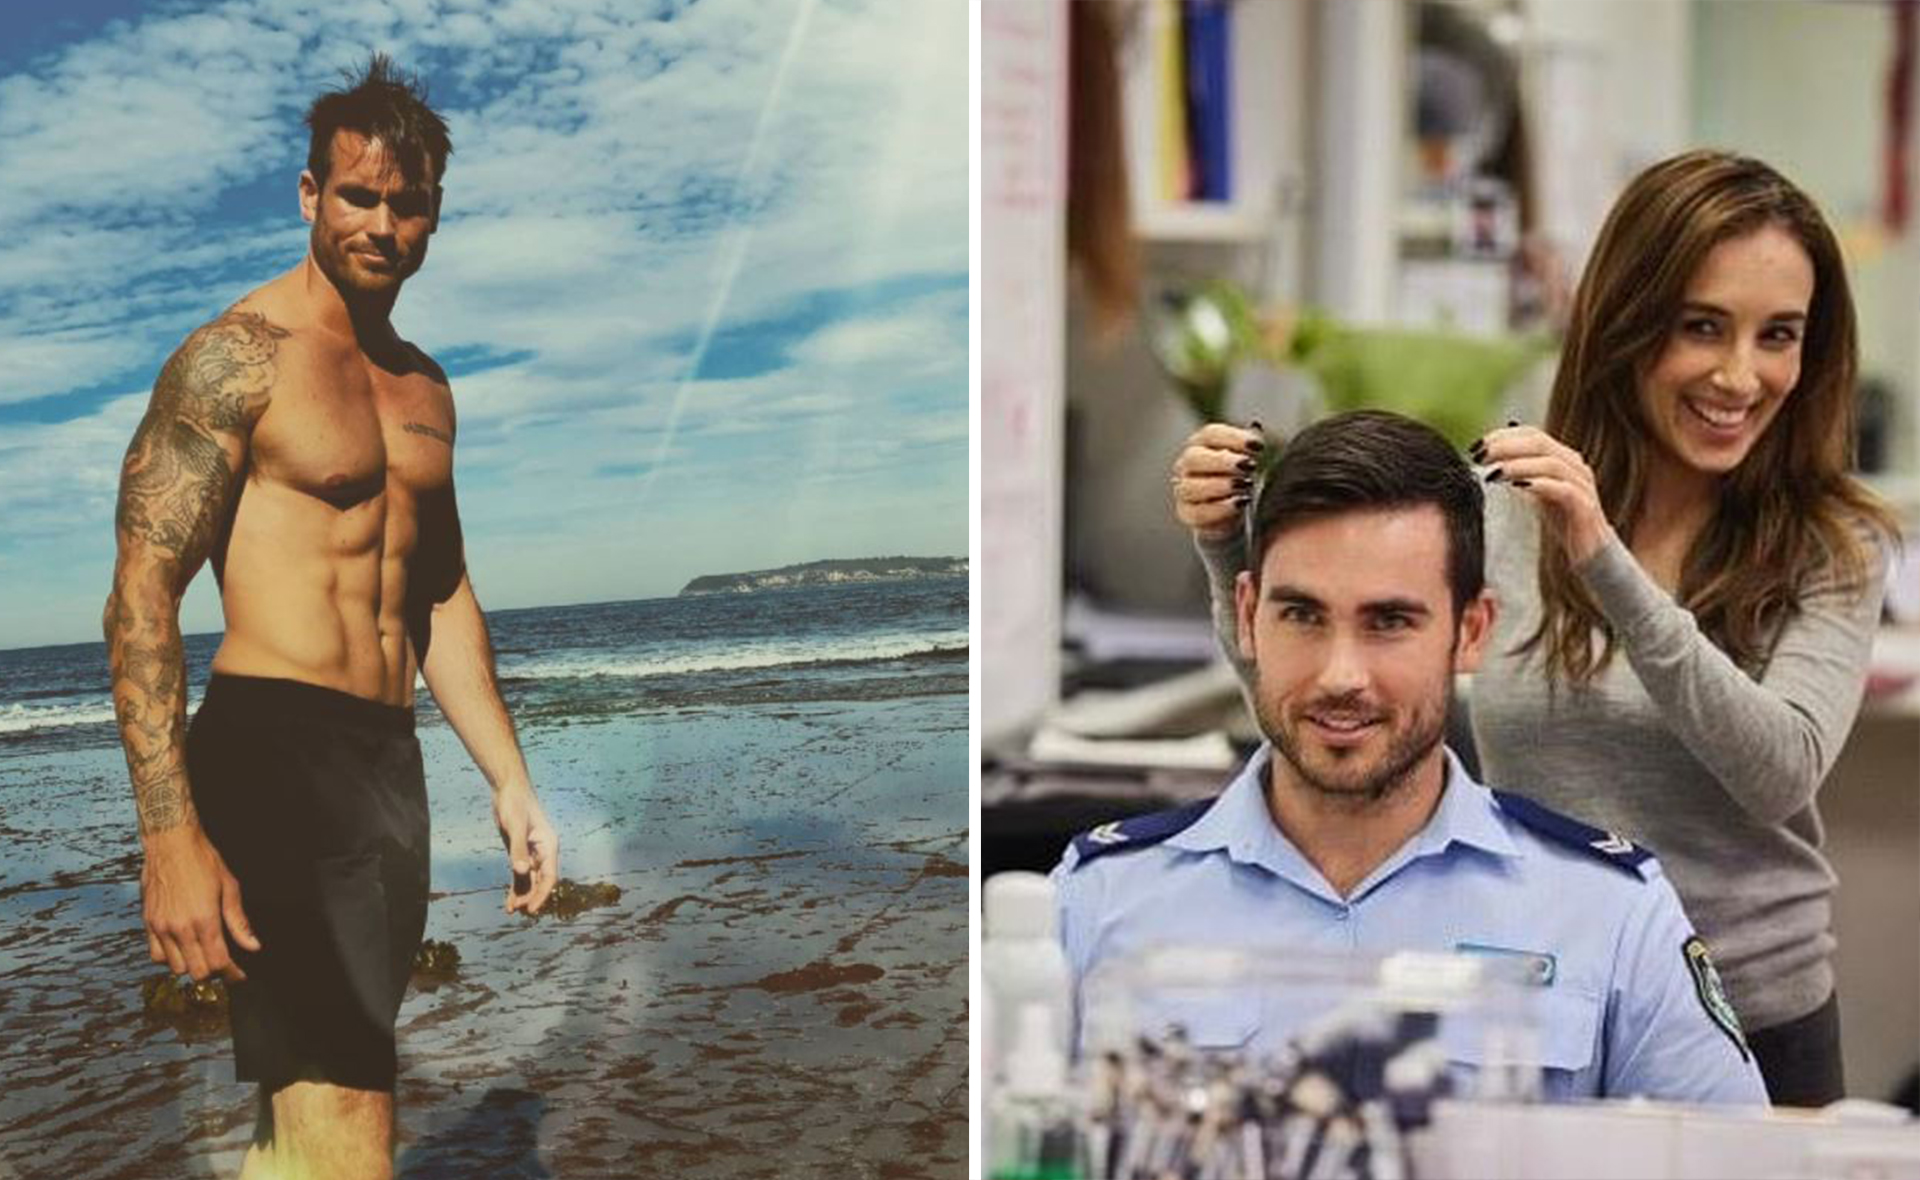 Meet Home and Away’s “hot cop” Nicholas Cartwright and his unexpected life before acting